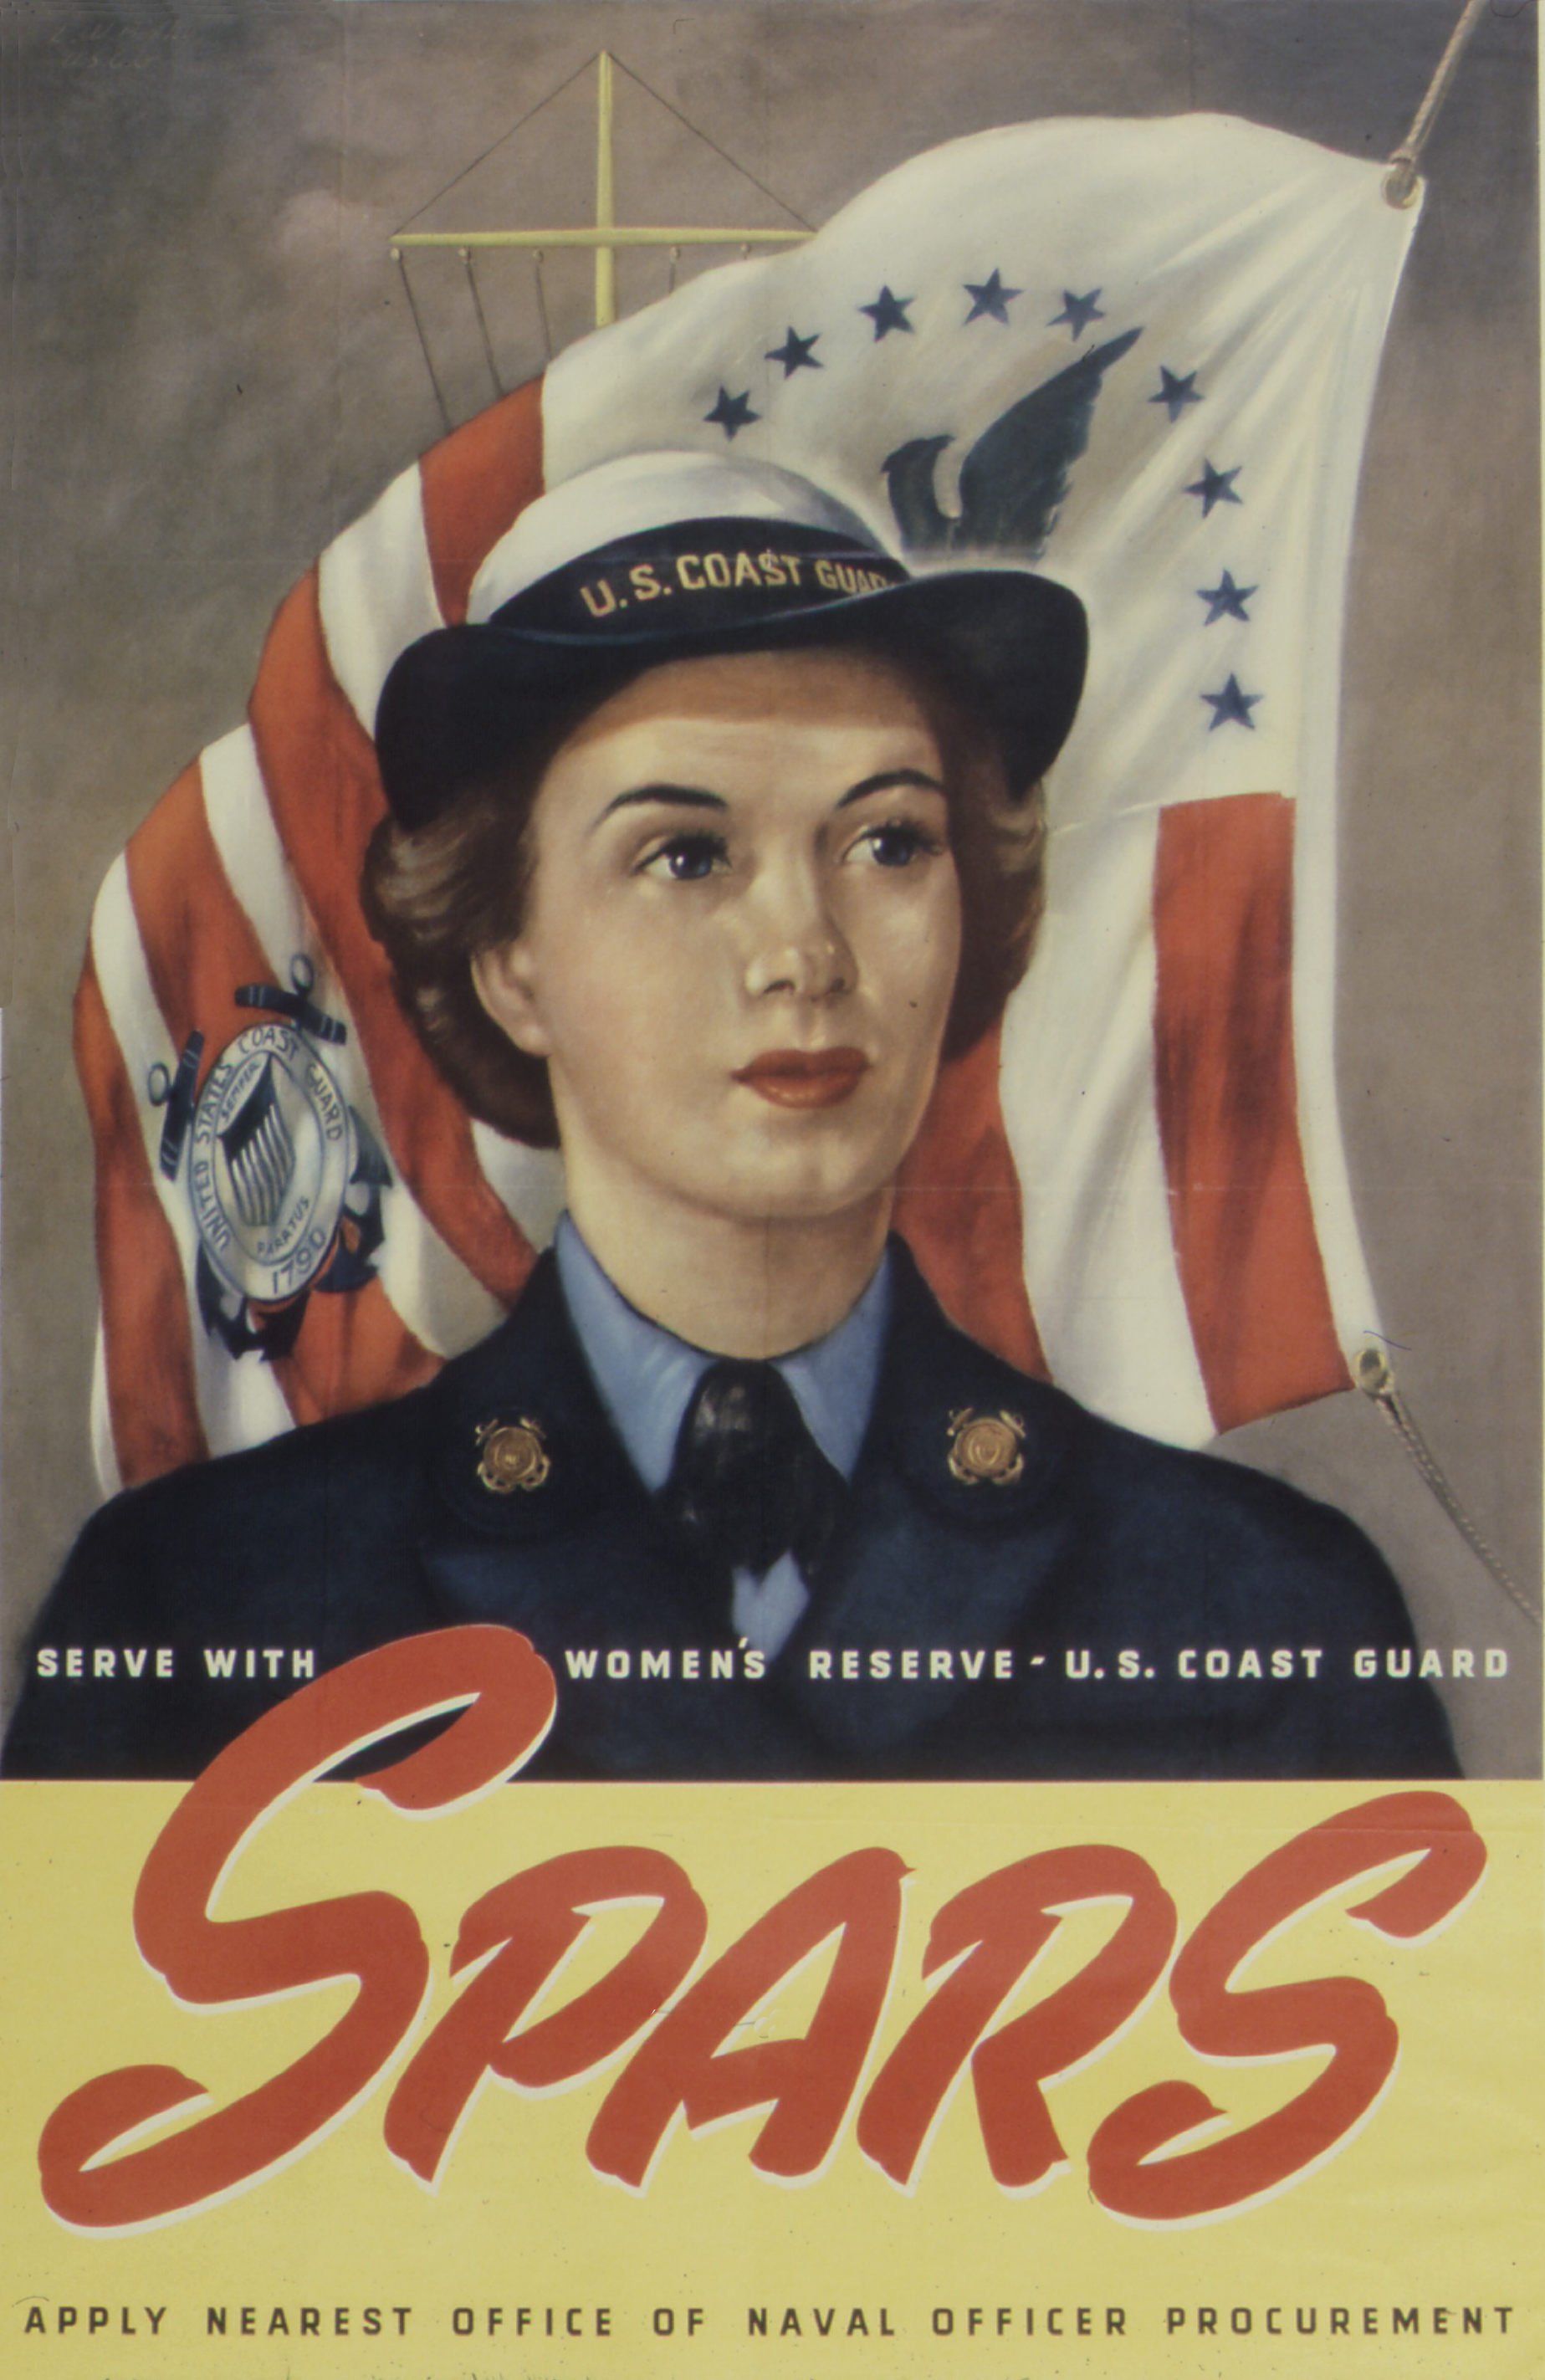 SPARS Recruiting Poster during World War II